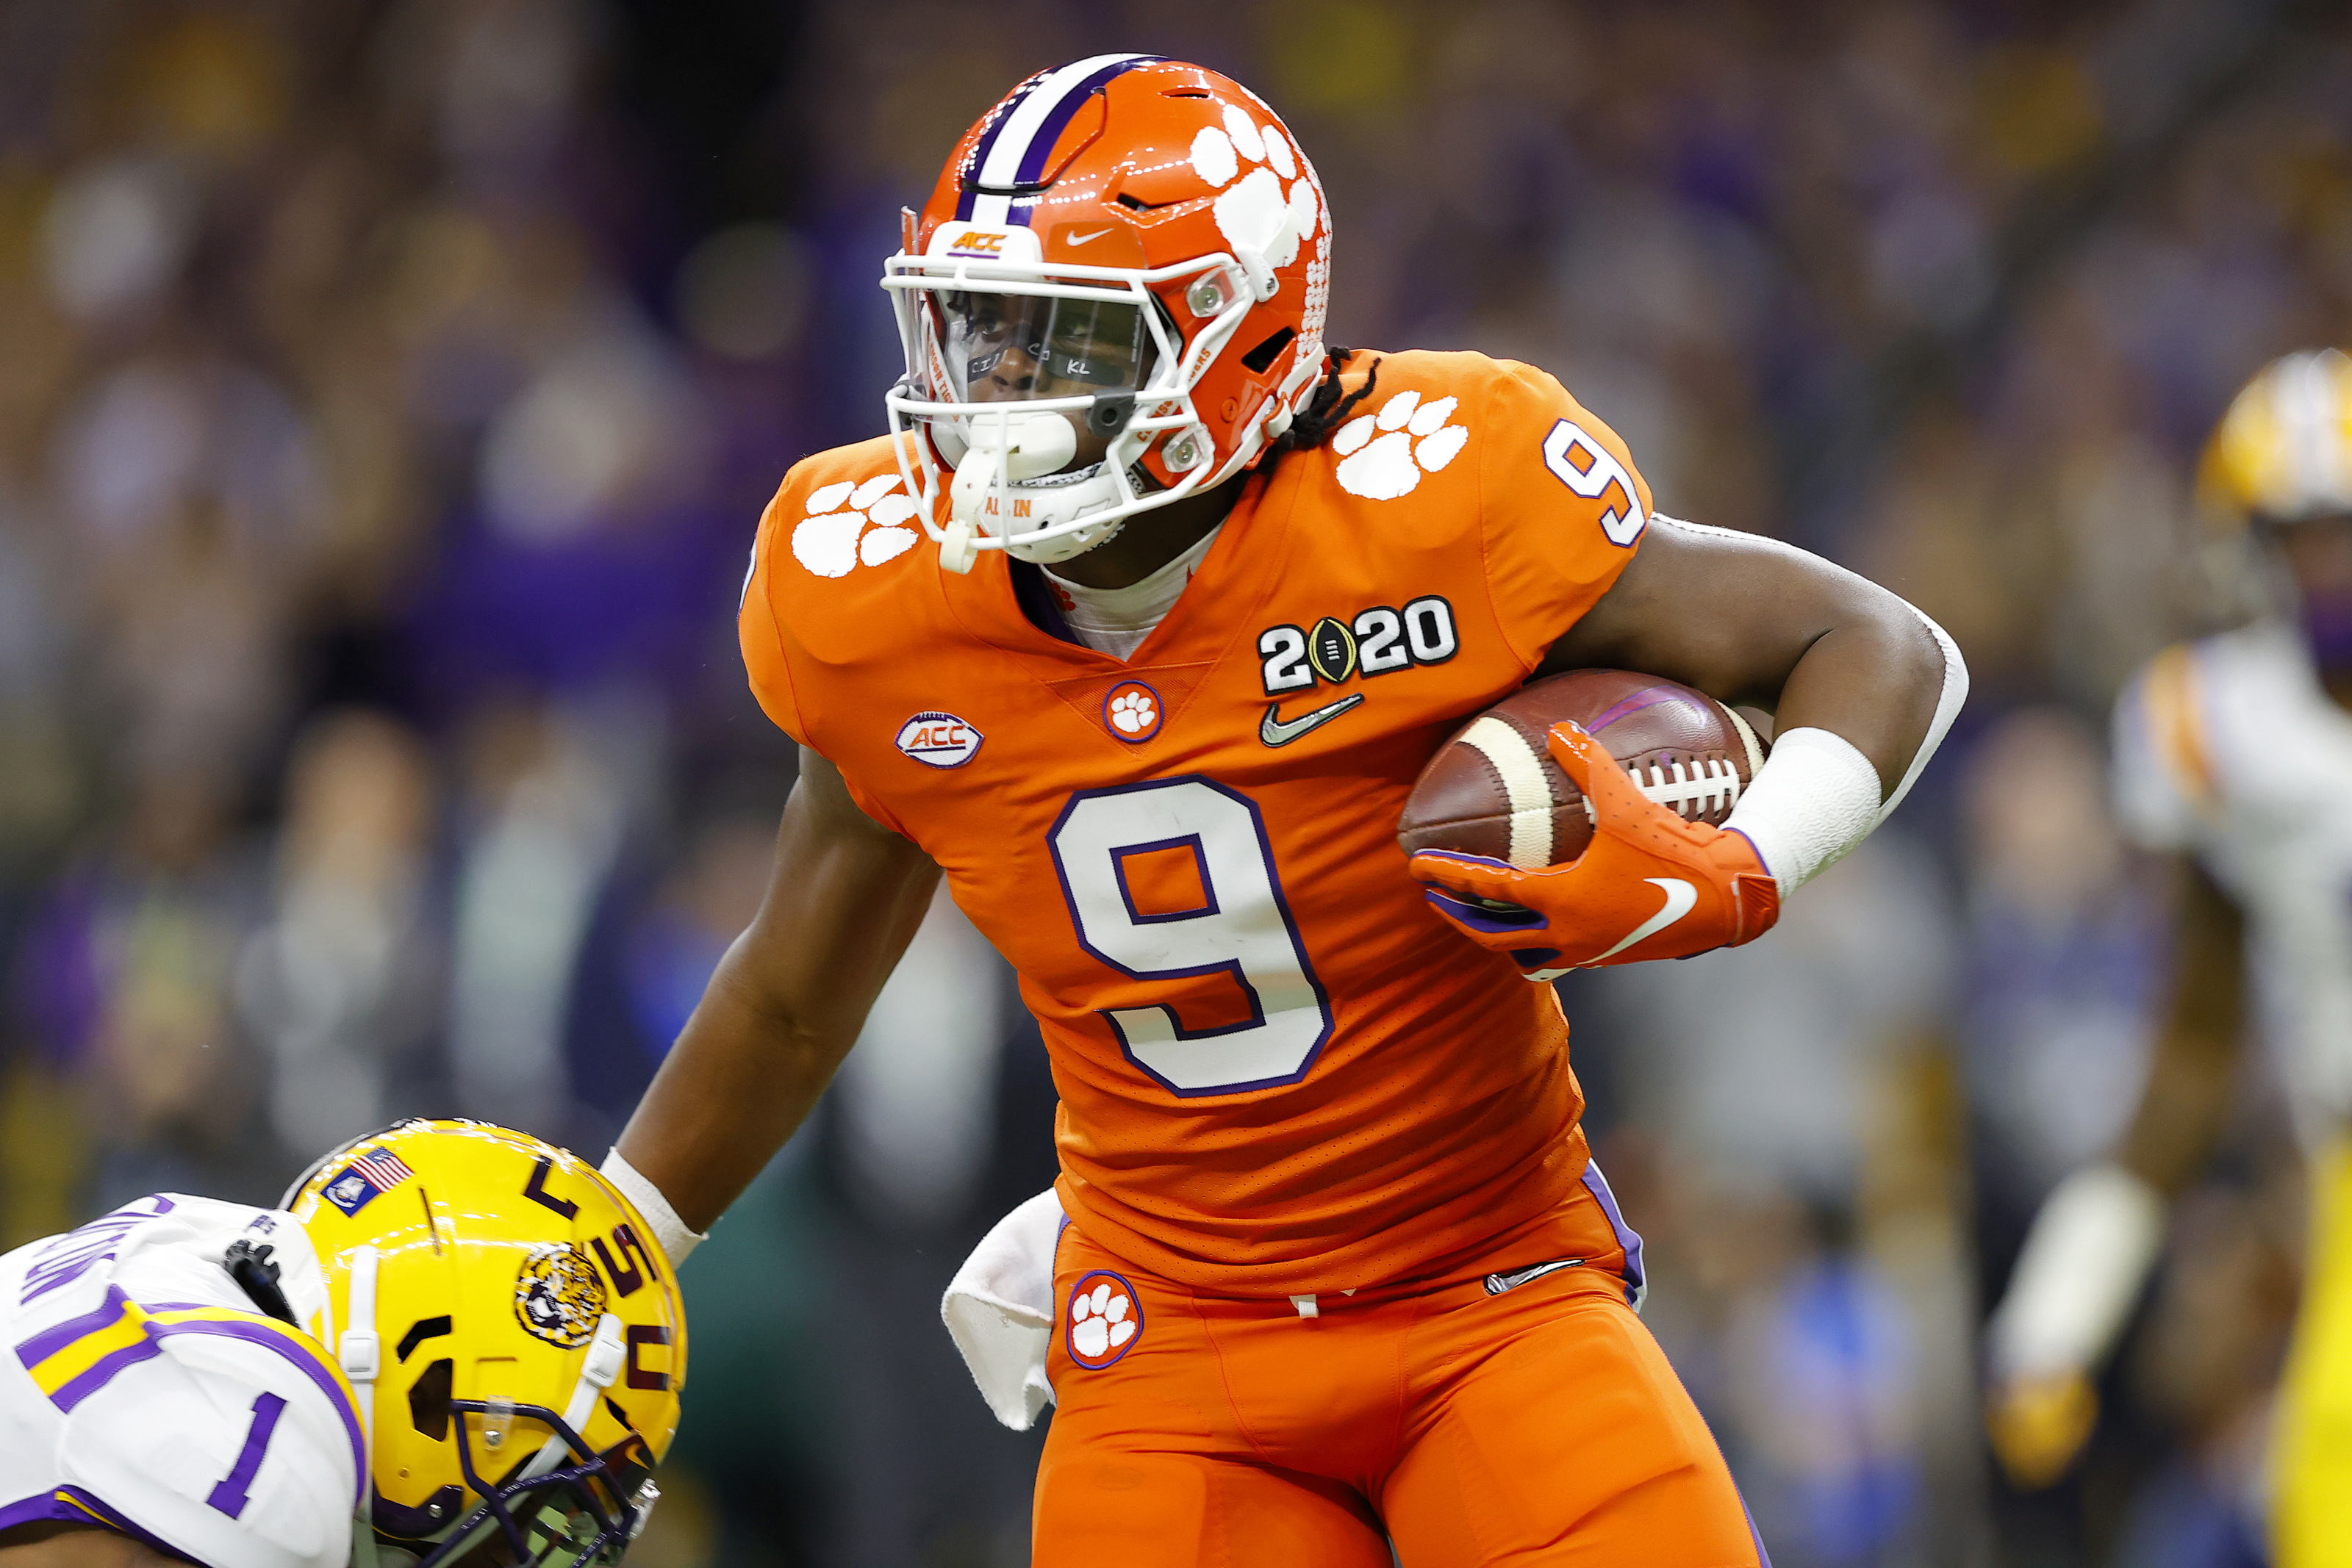 2020 NFL Draft: 5 Most surprising decisions to return to school